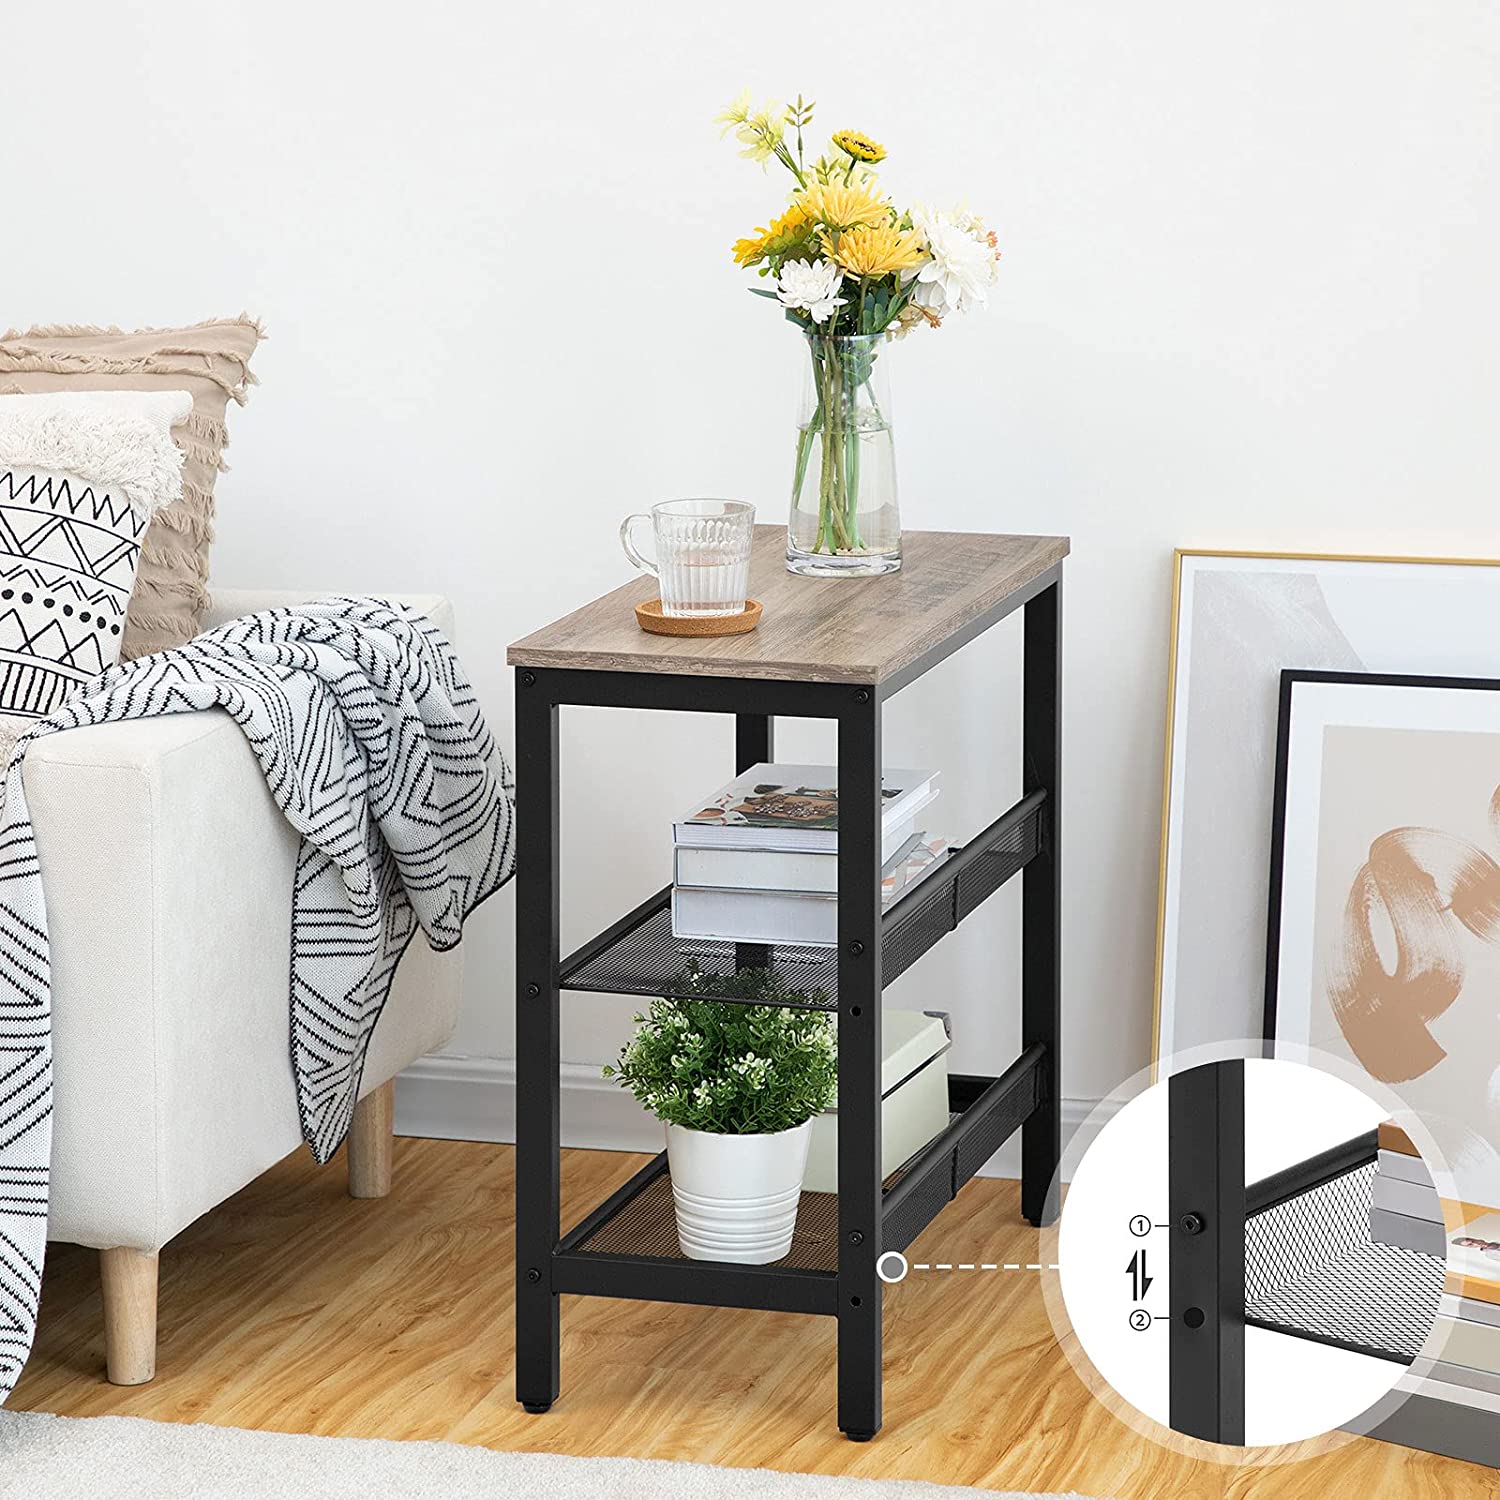 Side Tables 2 Flat or Slant Adjustable Shelves for Small Spaces, Hallway, Living Room, Bedroom, Sturdy, Easy Assembly, Greige and Black